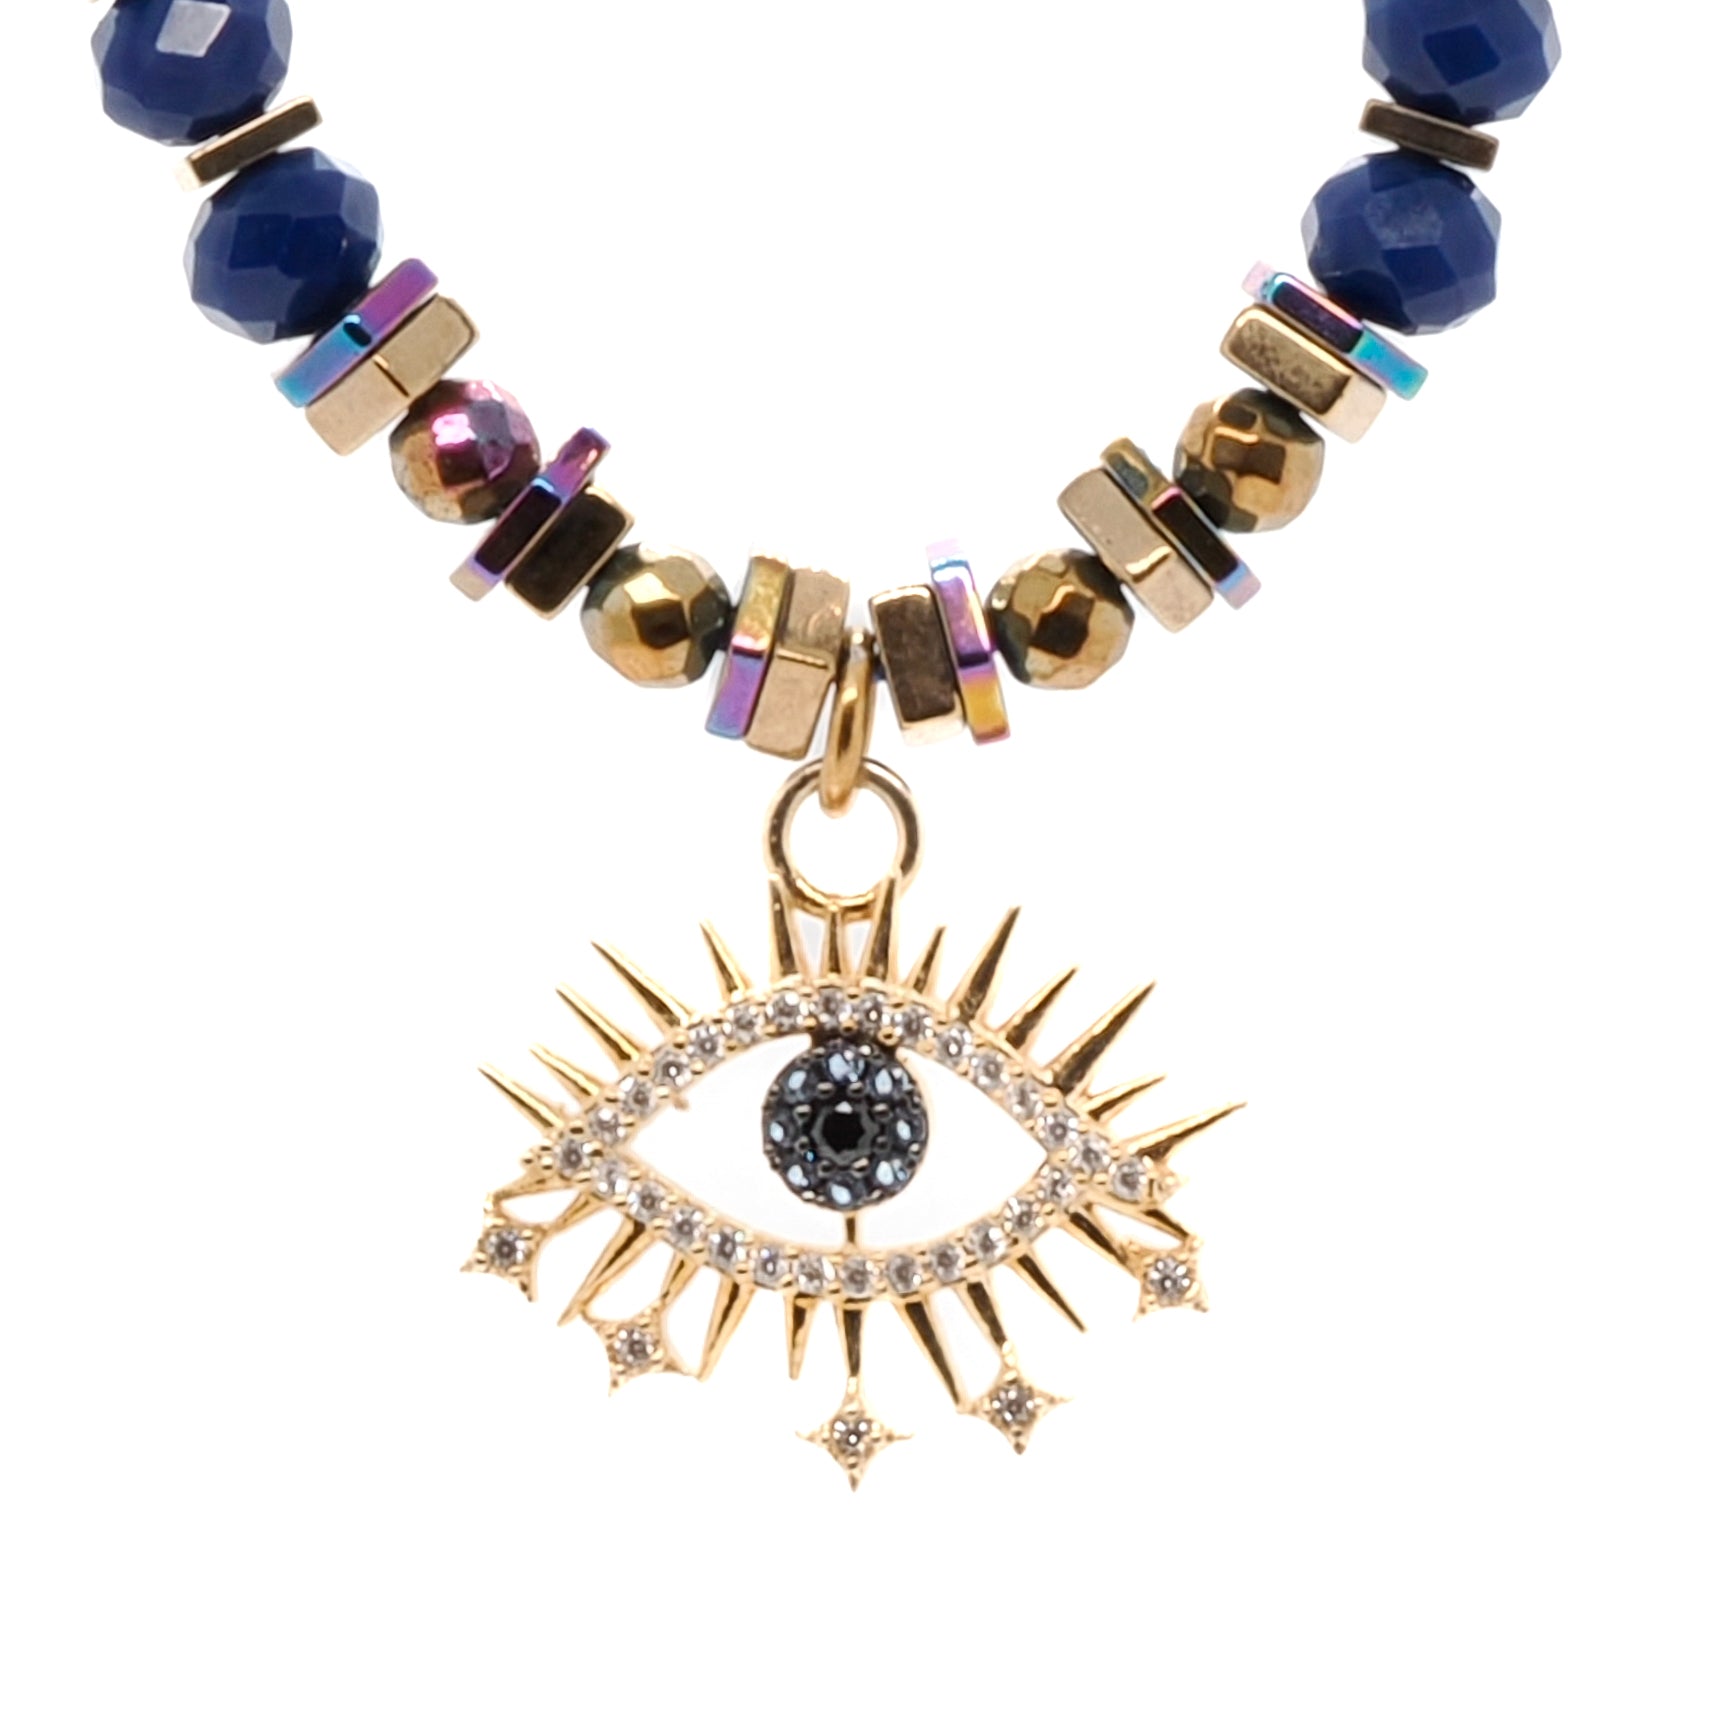 Multicolor Hematite Accents Add Playful Charm to Blue Evil Eye Necklace